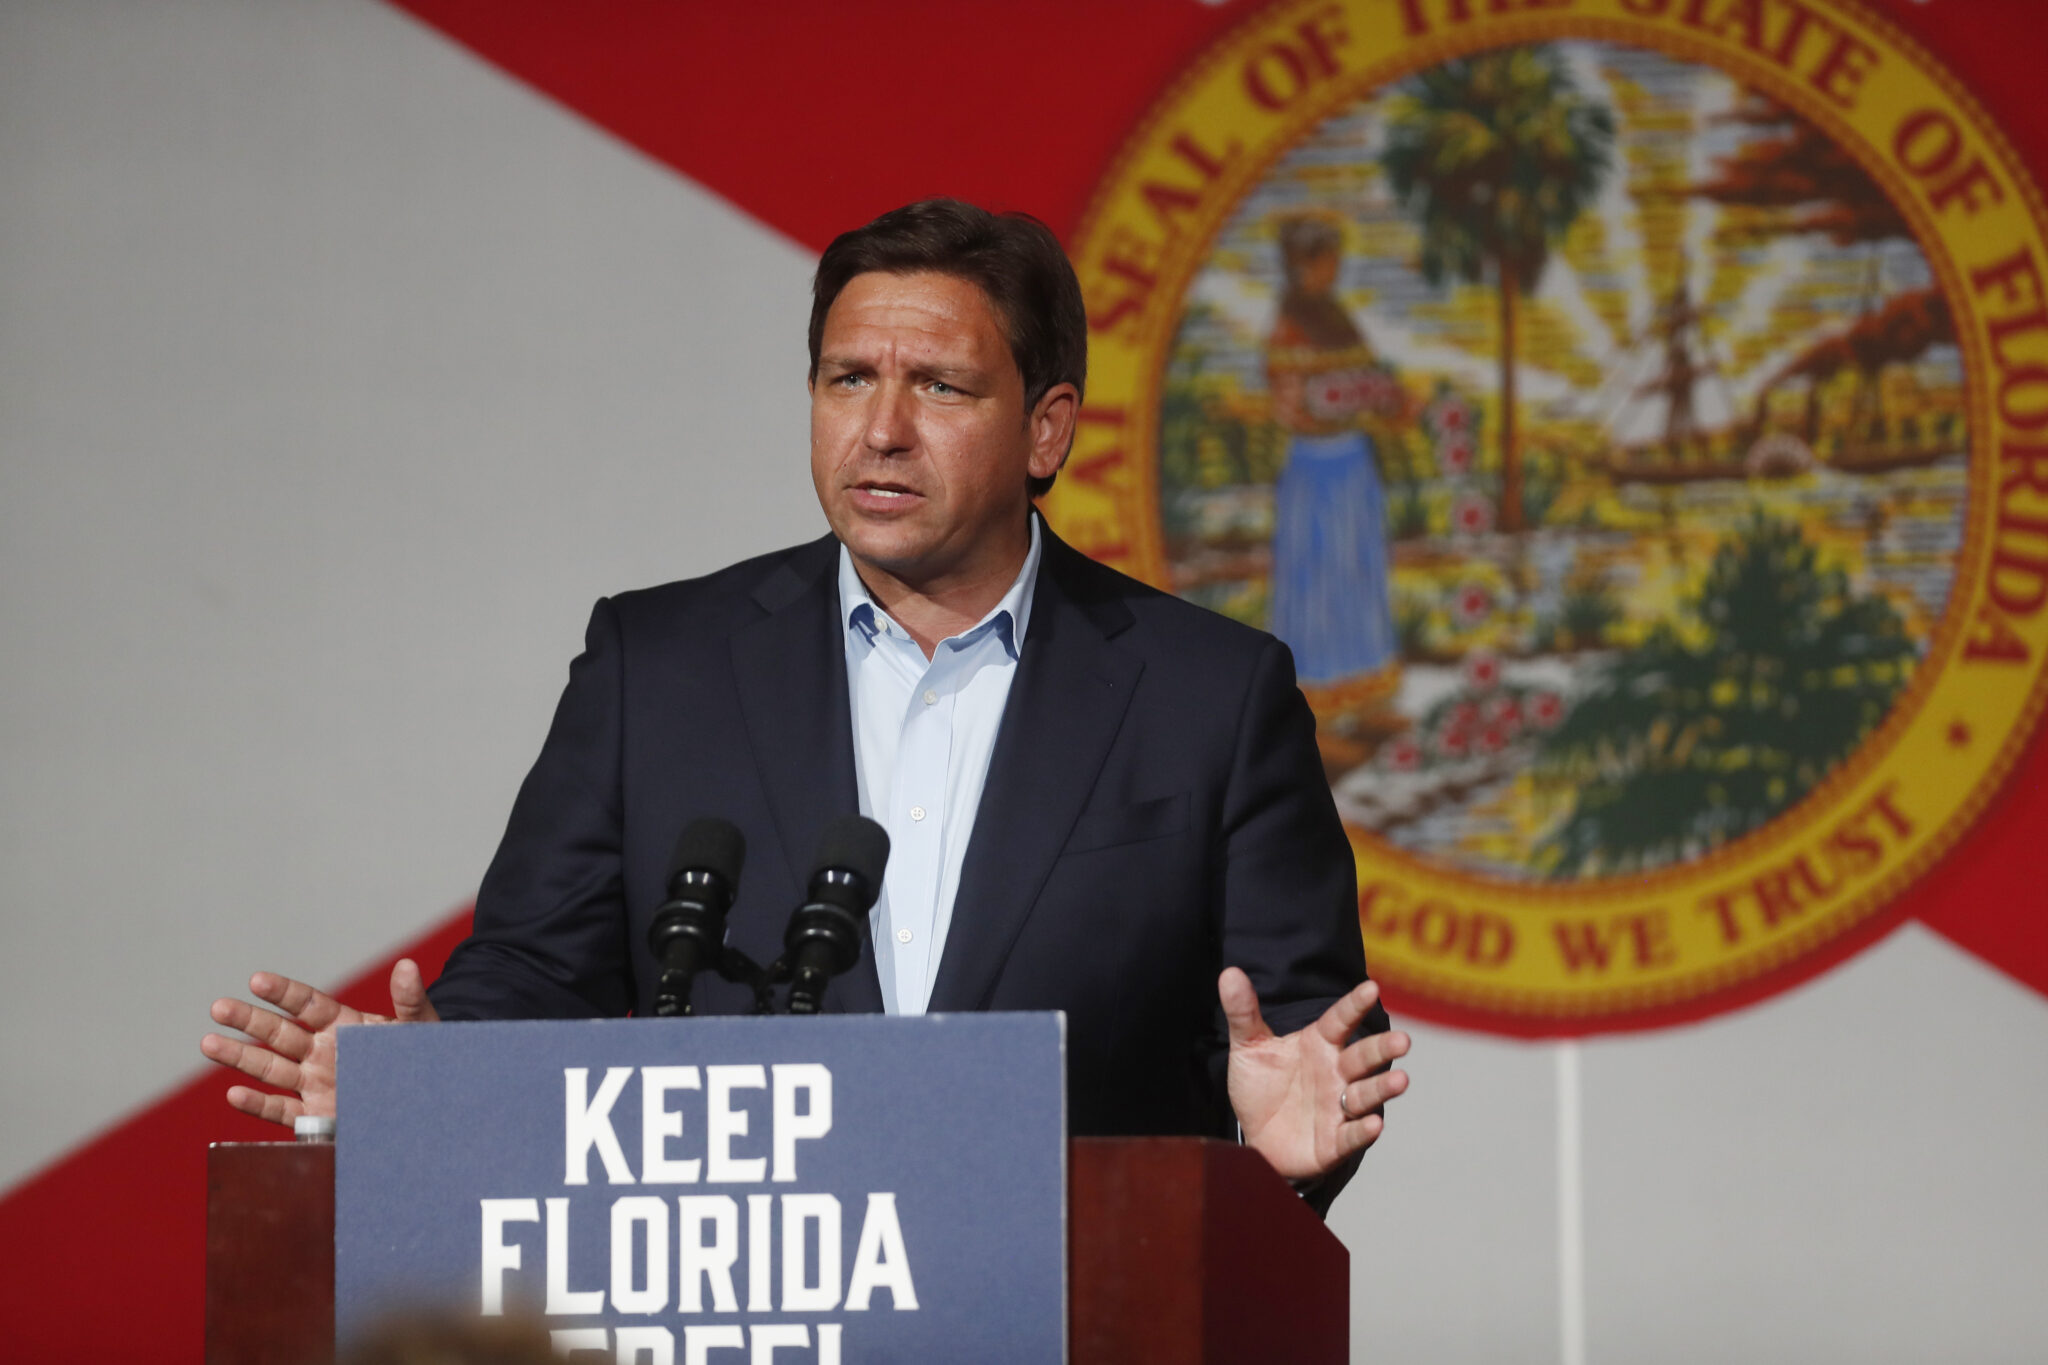 ORLANDO, FL - NOVEMBER 07: Republican Florida Gov. Ron DeSantis speaks at a campaign rally at the Cheyenne Saloon on November 7, 2022 in Orlando, Florida. DeSantis faces former Democratic Gov. Charlie Crist in tomorrow's general election. (Photo by Octavio Jones/Getty Images)